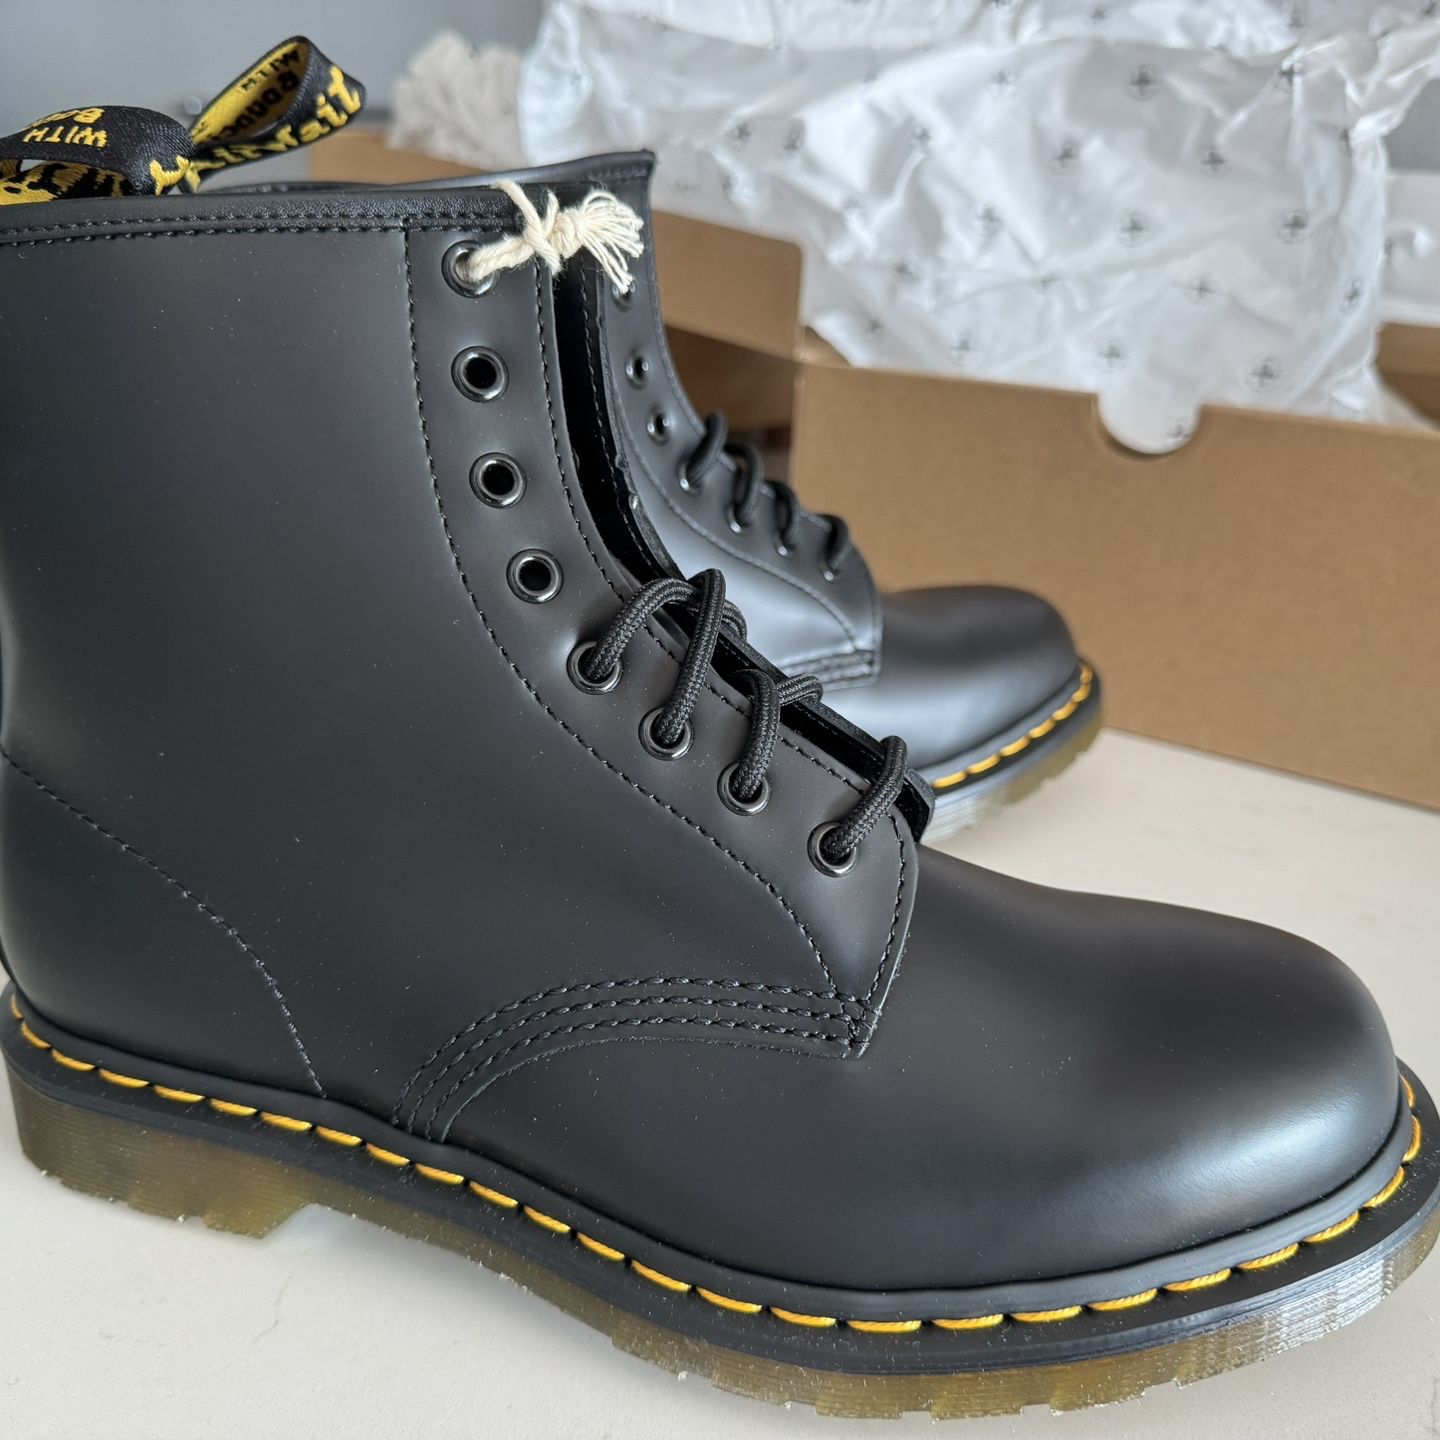 Doc Martens “1460” Leather Boots (never worn) - Unisex Size M9/W10